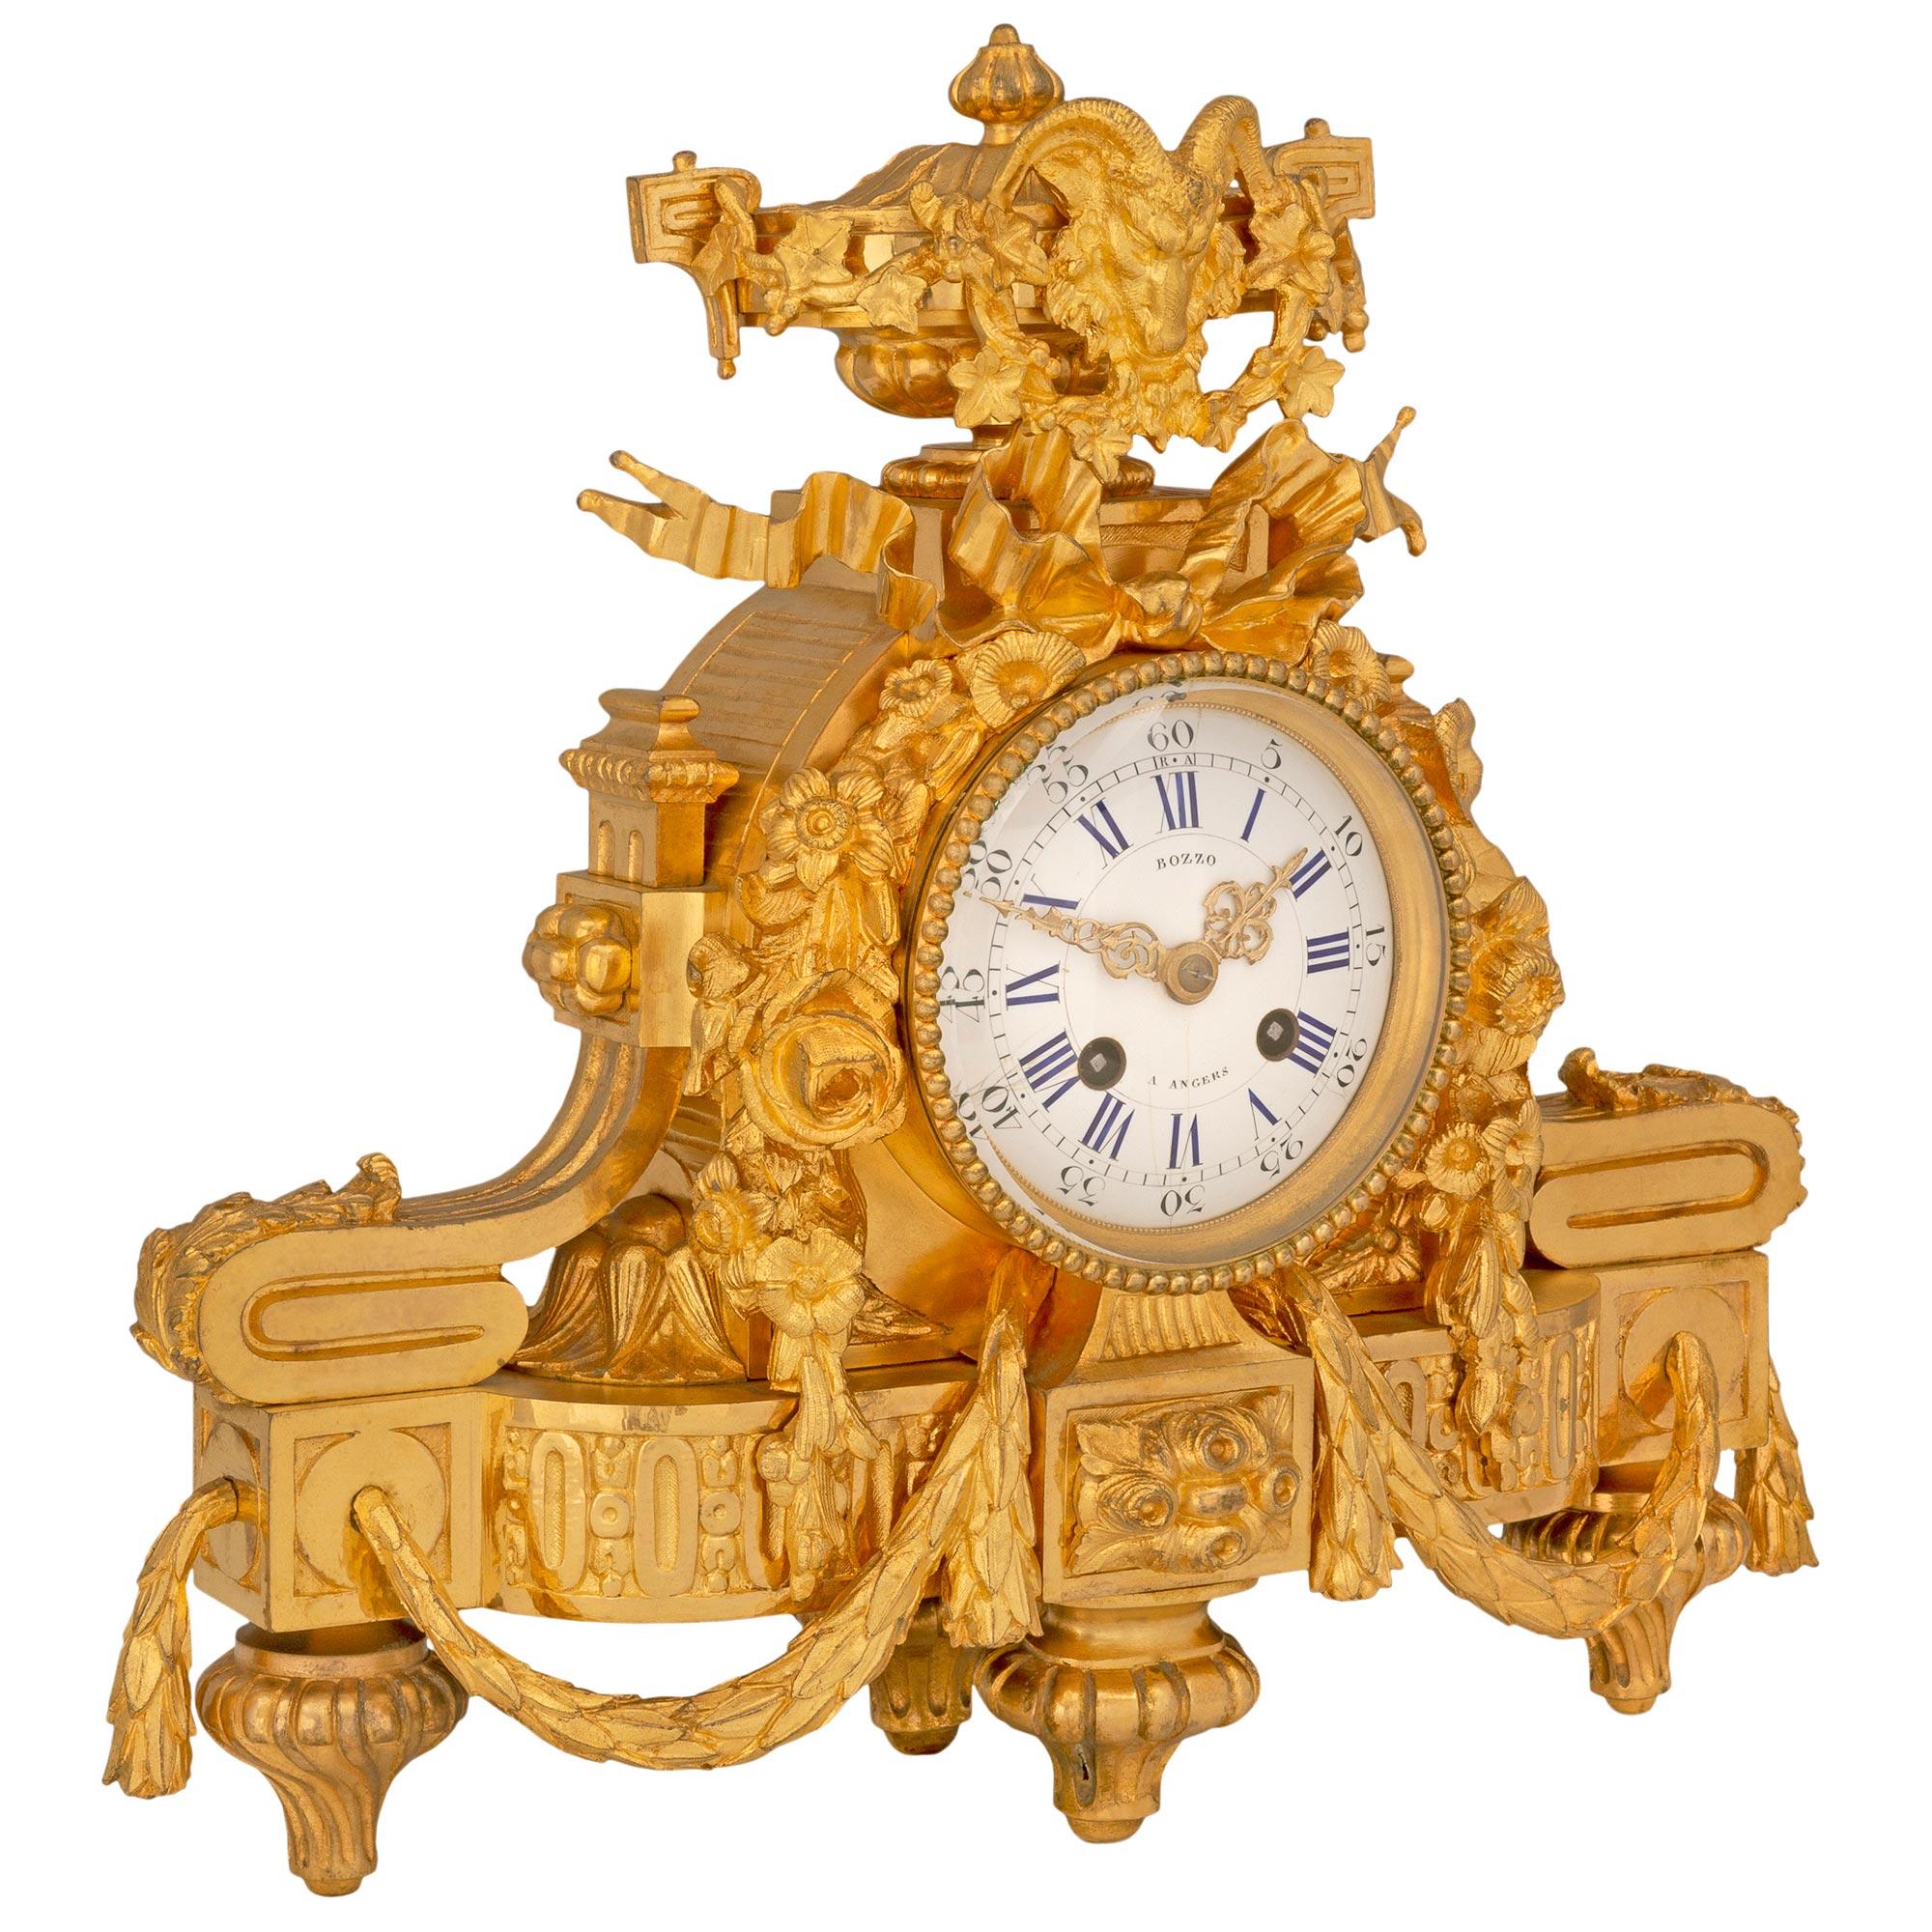 An exceptional French mid 19th century Louis XVI st. ormolu clock, signed Bozzo, A. Angers and stamped Japy Freres Médaille d'Or 1855. The clock is raised by four elegant topie shaped feet with fluted designs below striking block reserves. Richly